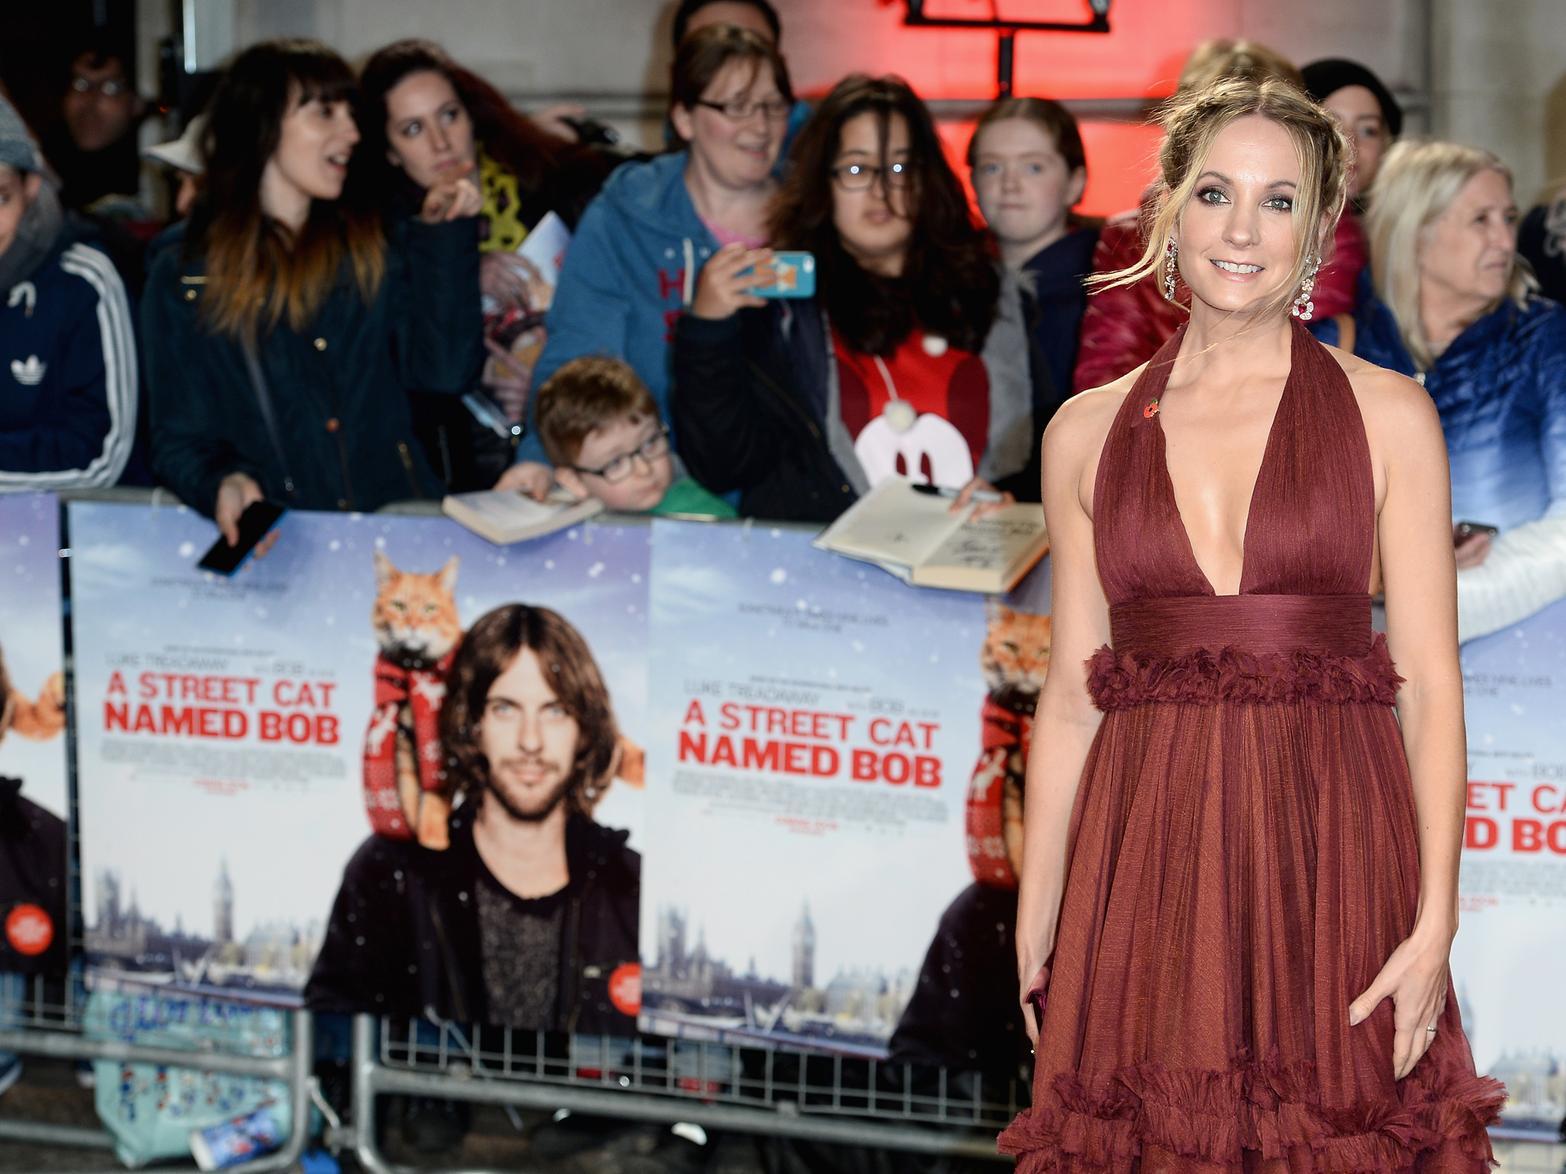 Joanne at the UK premiere of A Street Cat Named Bob in 2016 in which she played Val.